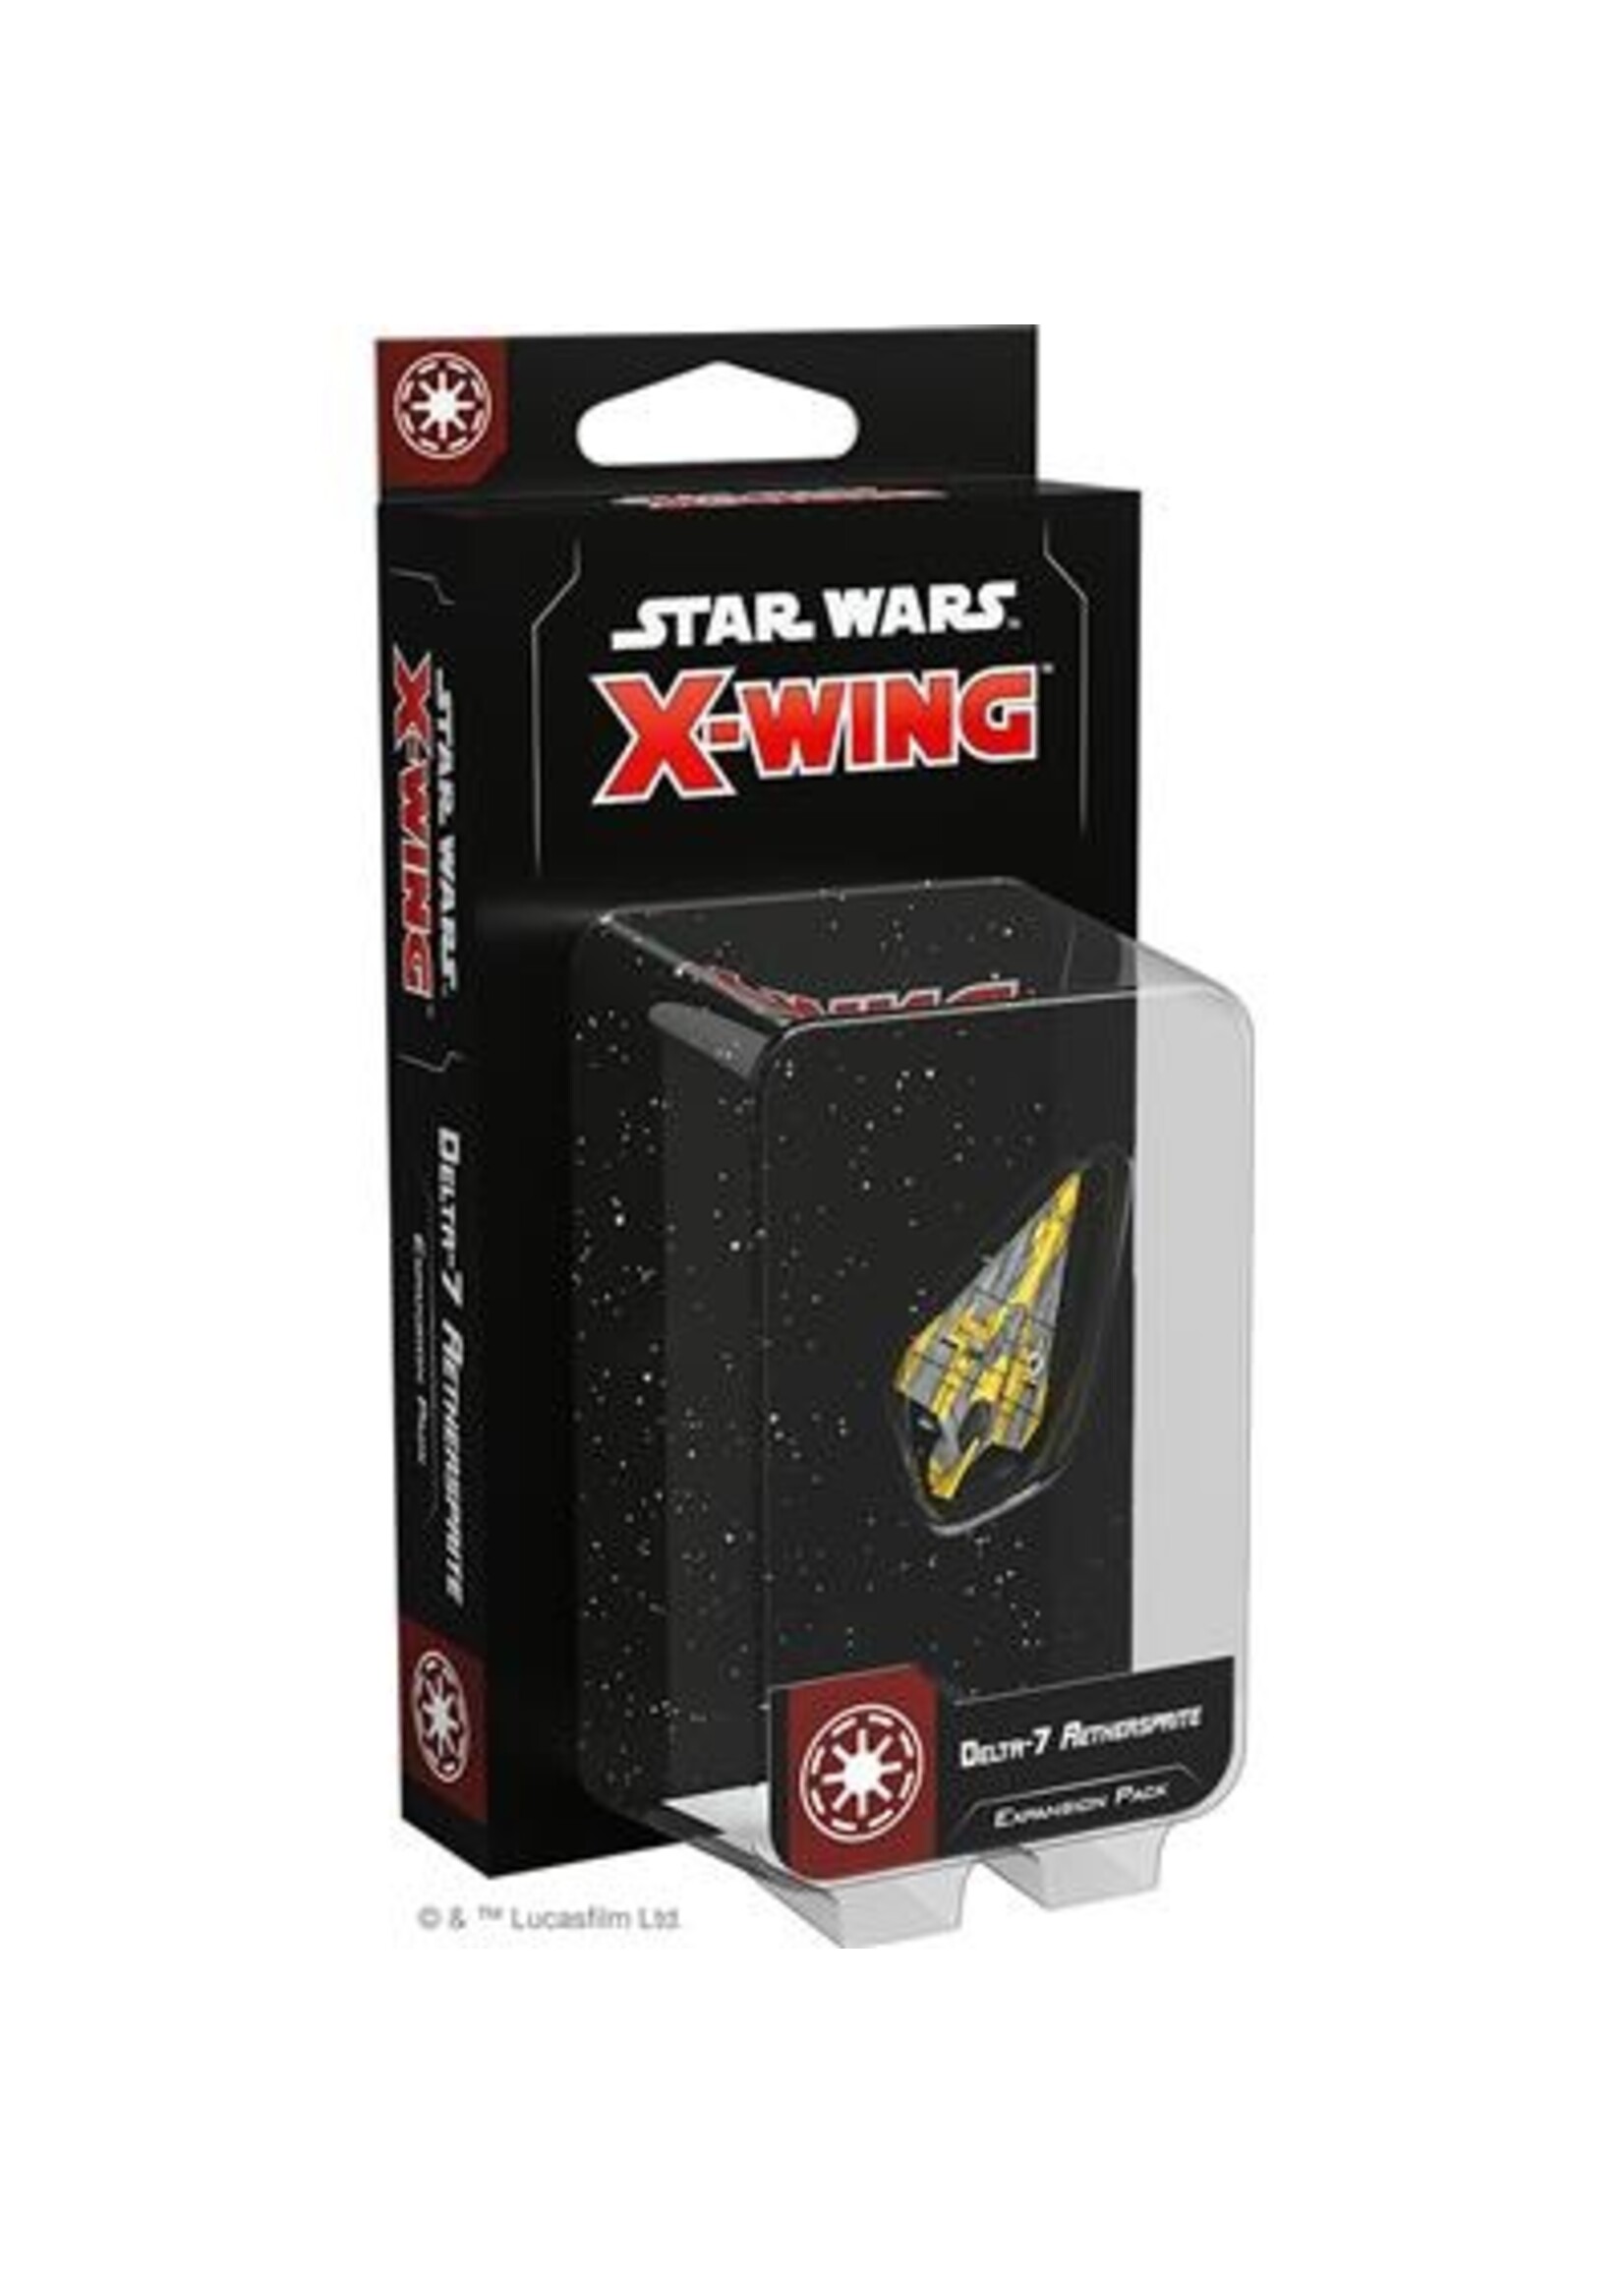 Star Wars X-Wing: 2nd Edition - Delta-7 Aethersprite Expansion Pack